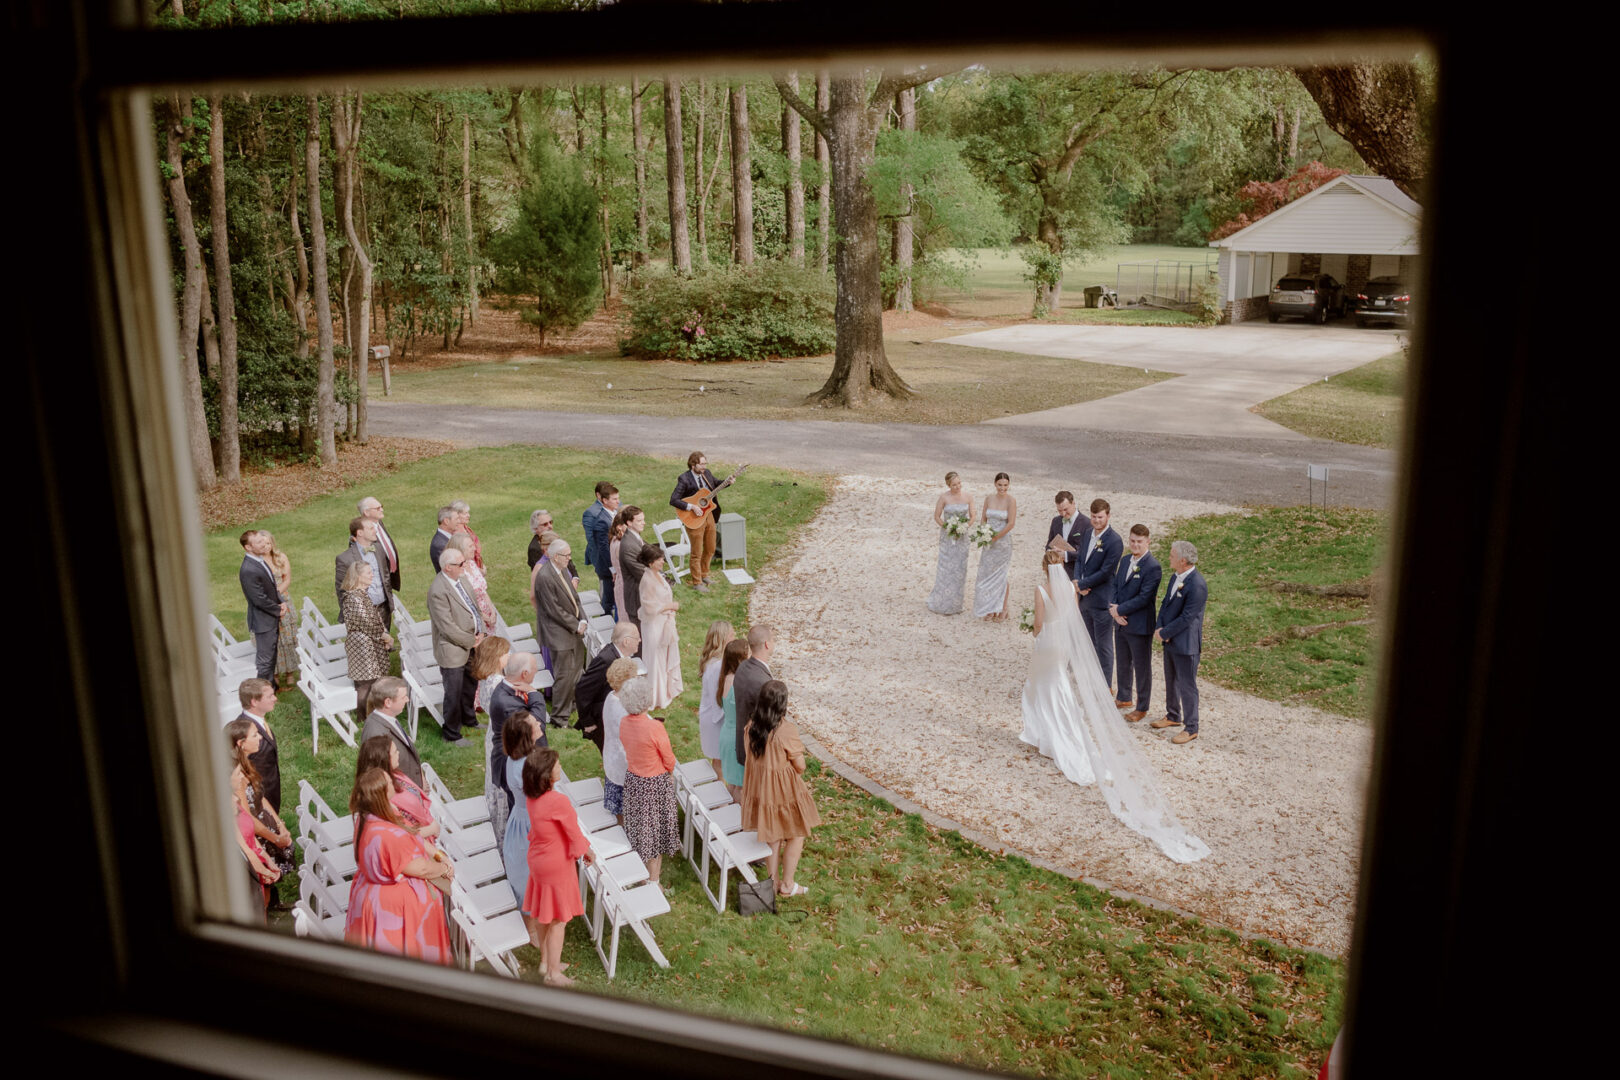 A home wedding for this lucky photographer in Georgia, South Carolina. Photographed through the window toward their ancient oak tree. L1008593